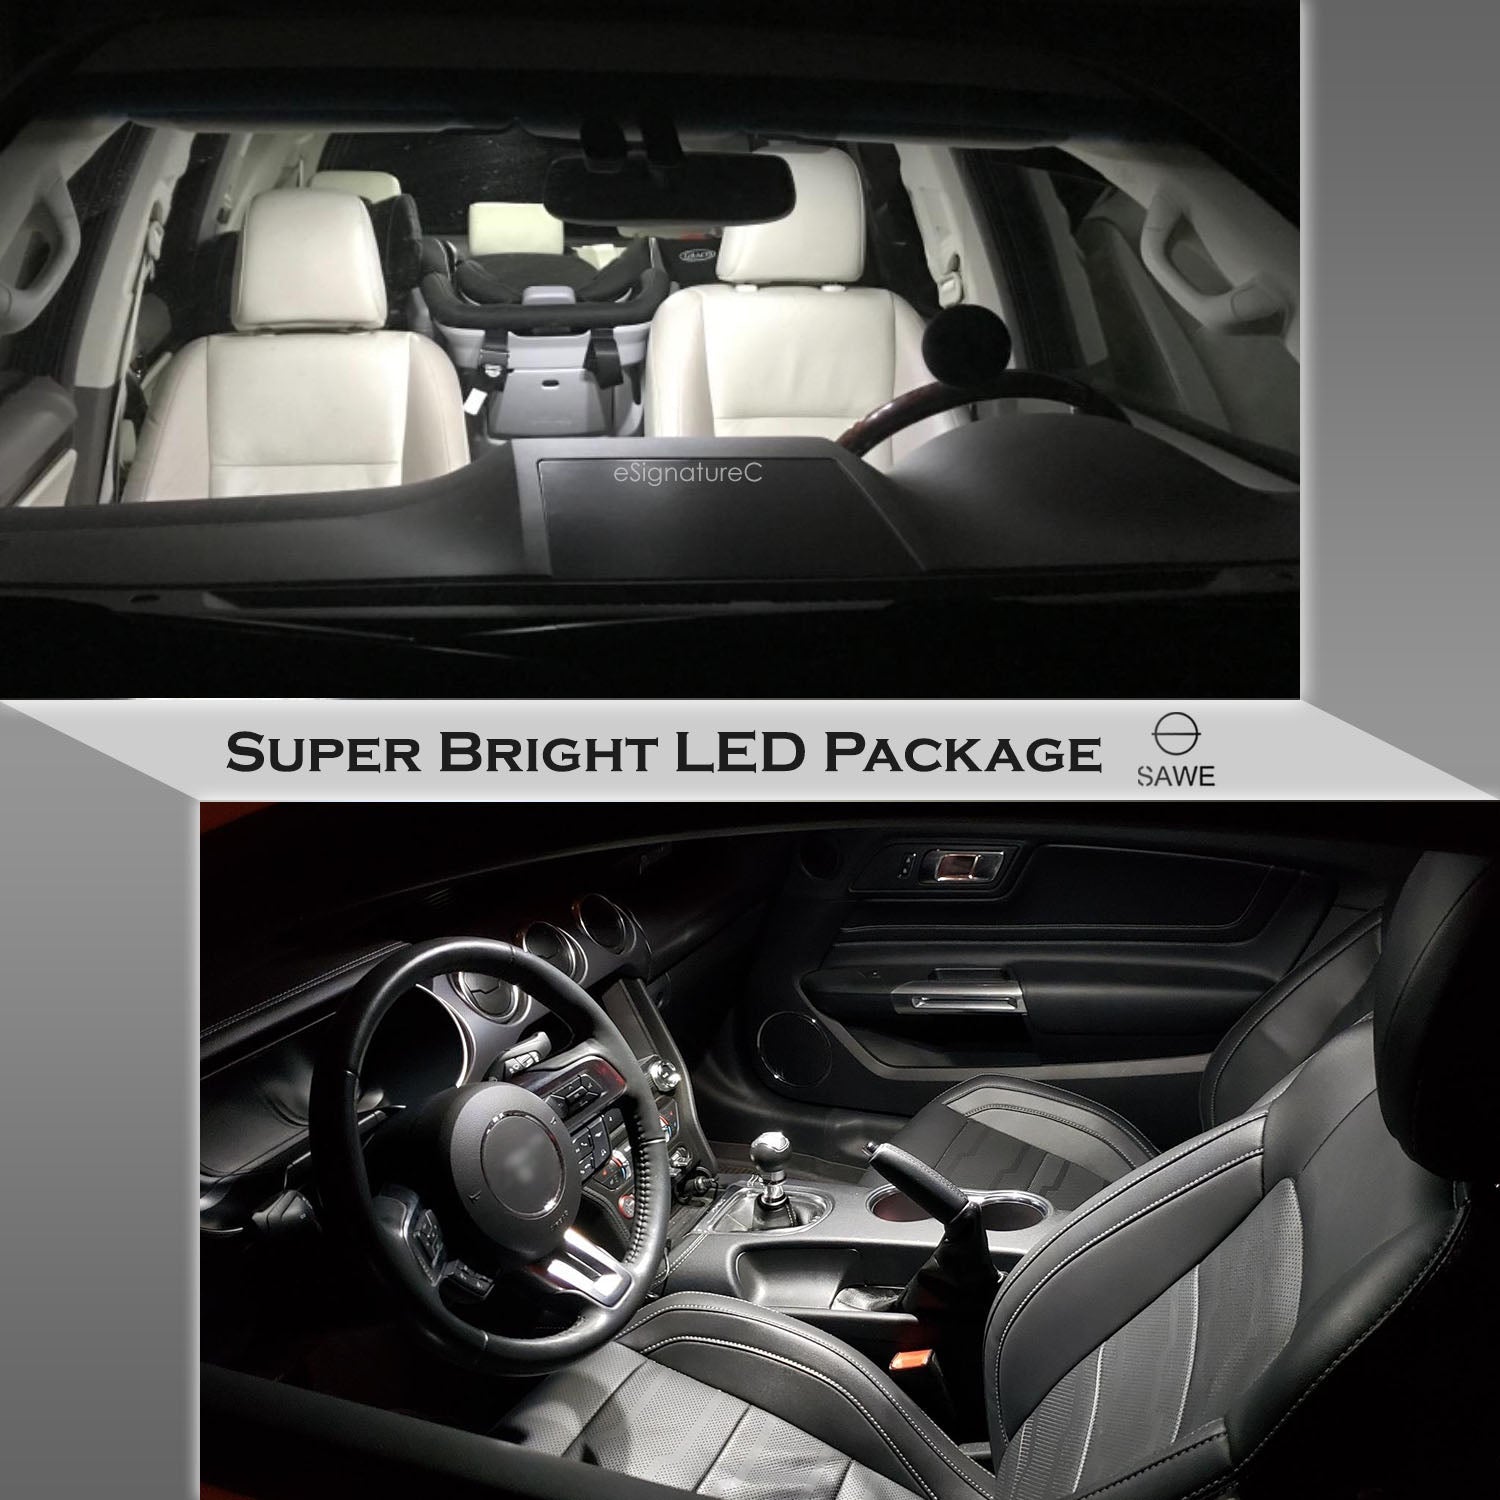 For Hyundai Accent Interior LED Lights - Dome & Map Light Bulbs Package Kit for 2018 - 2021 - White